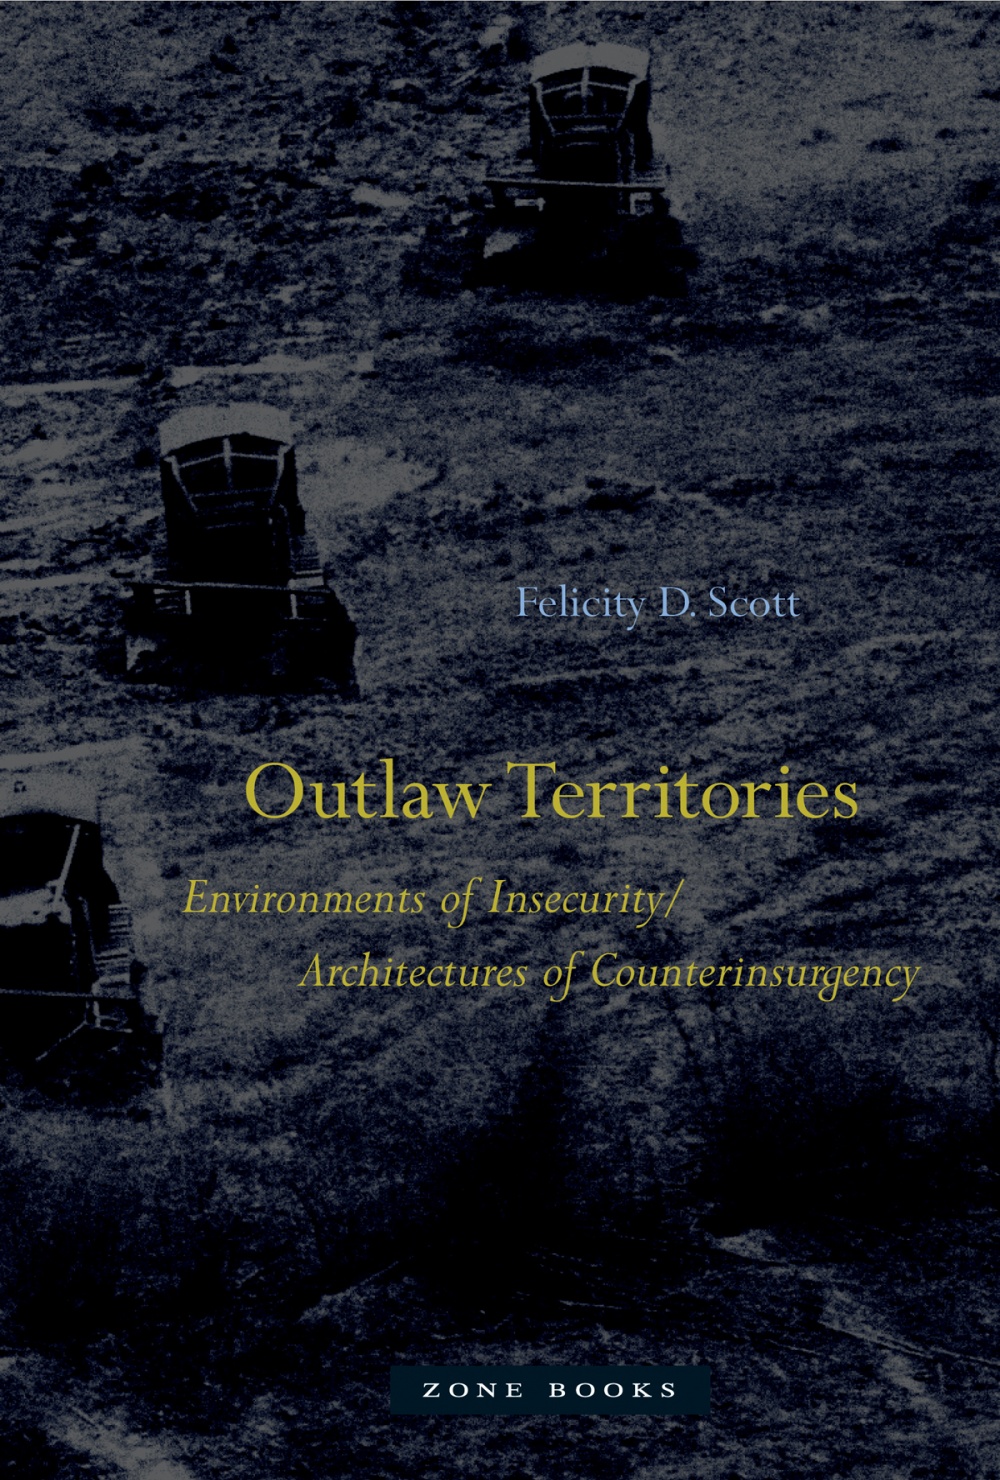 Outlaw Territories